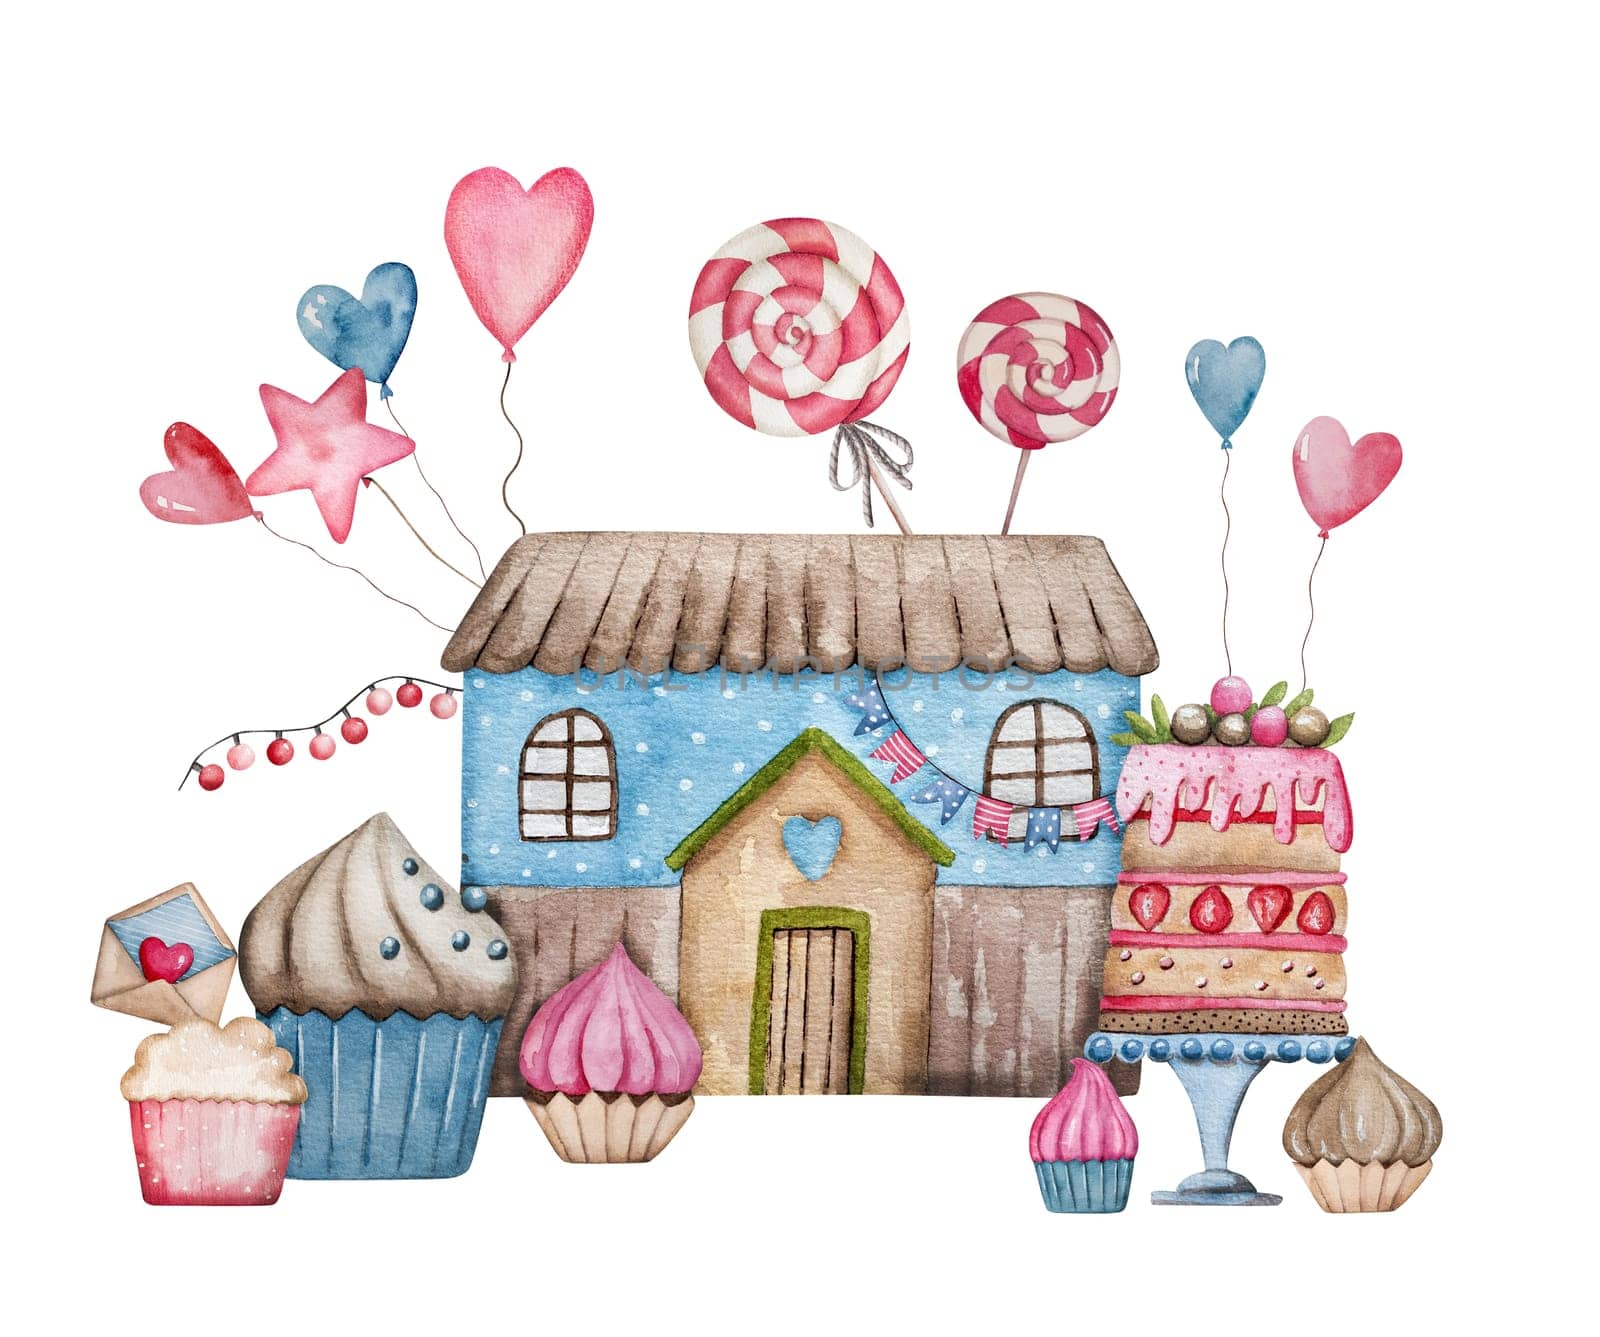 Hand-Painted Watercolor Illustration Of A Cute Blue House Surrounded By Cakes, Cupcakes, And Candies by tan4ikk1